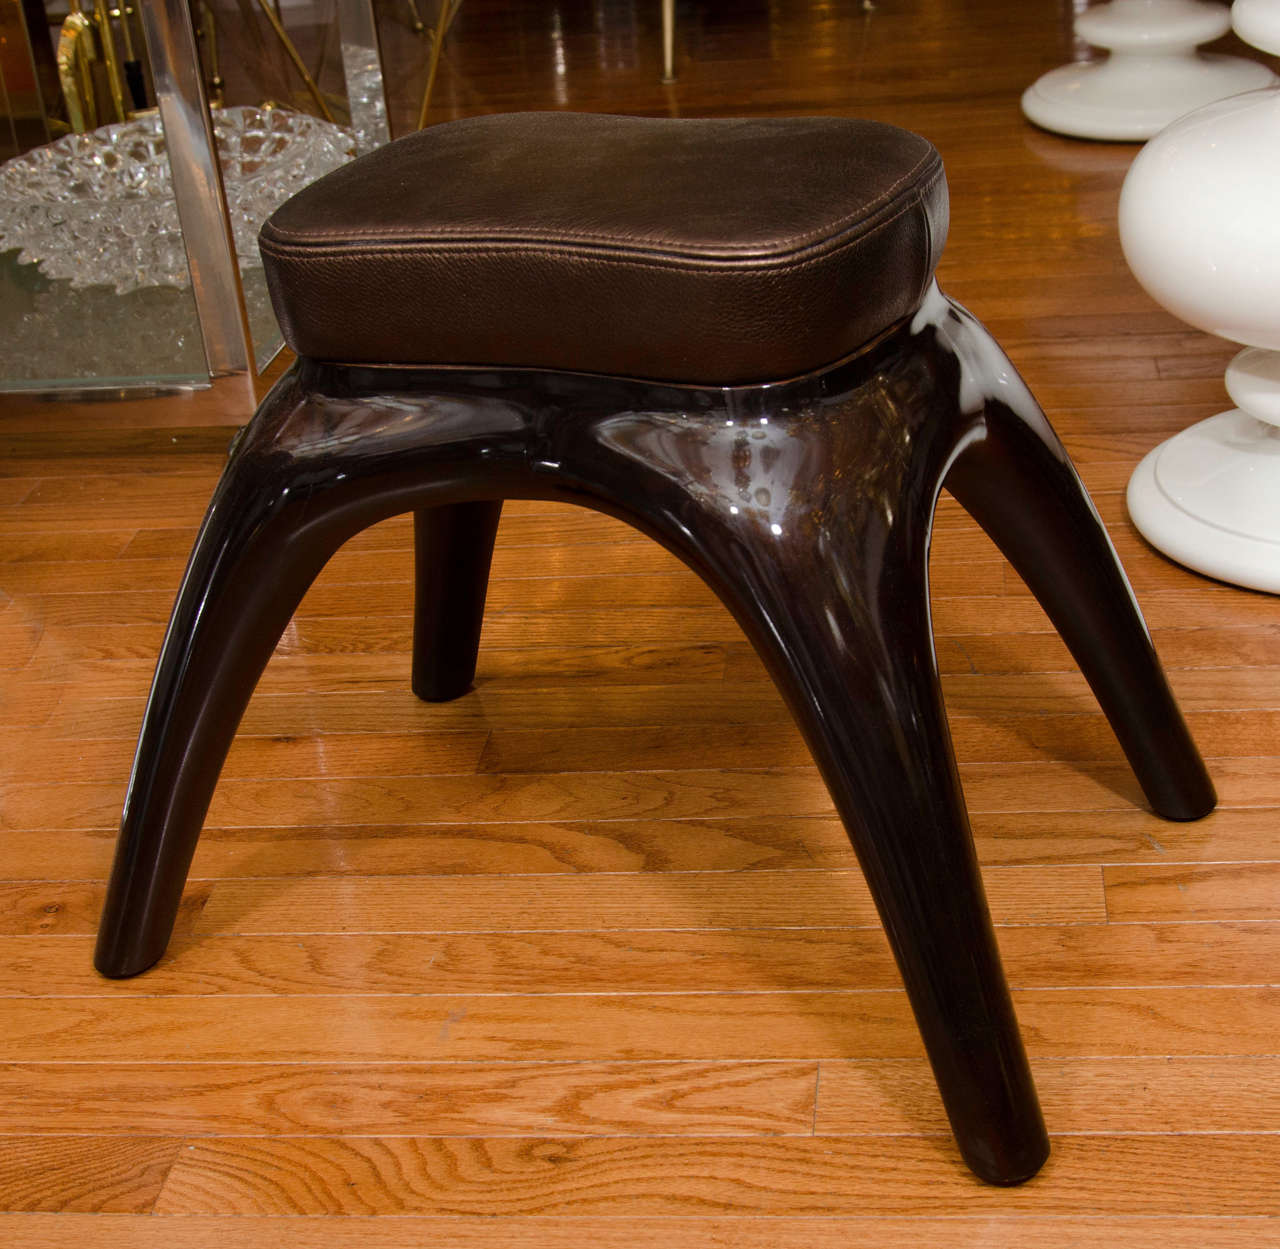 Pair of petite, lacquered wood benches with splayed legs.

View our complete collection at www.johnsalibello.com